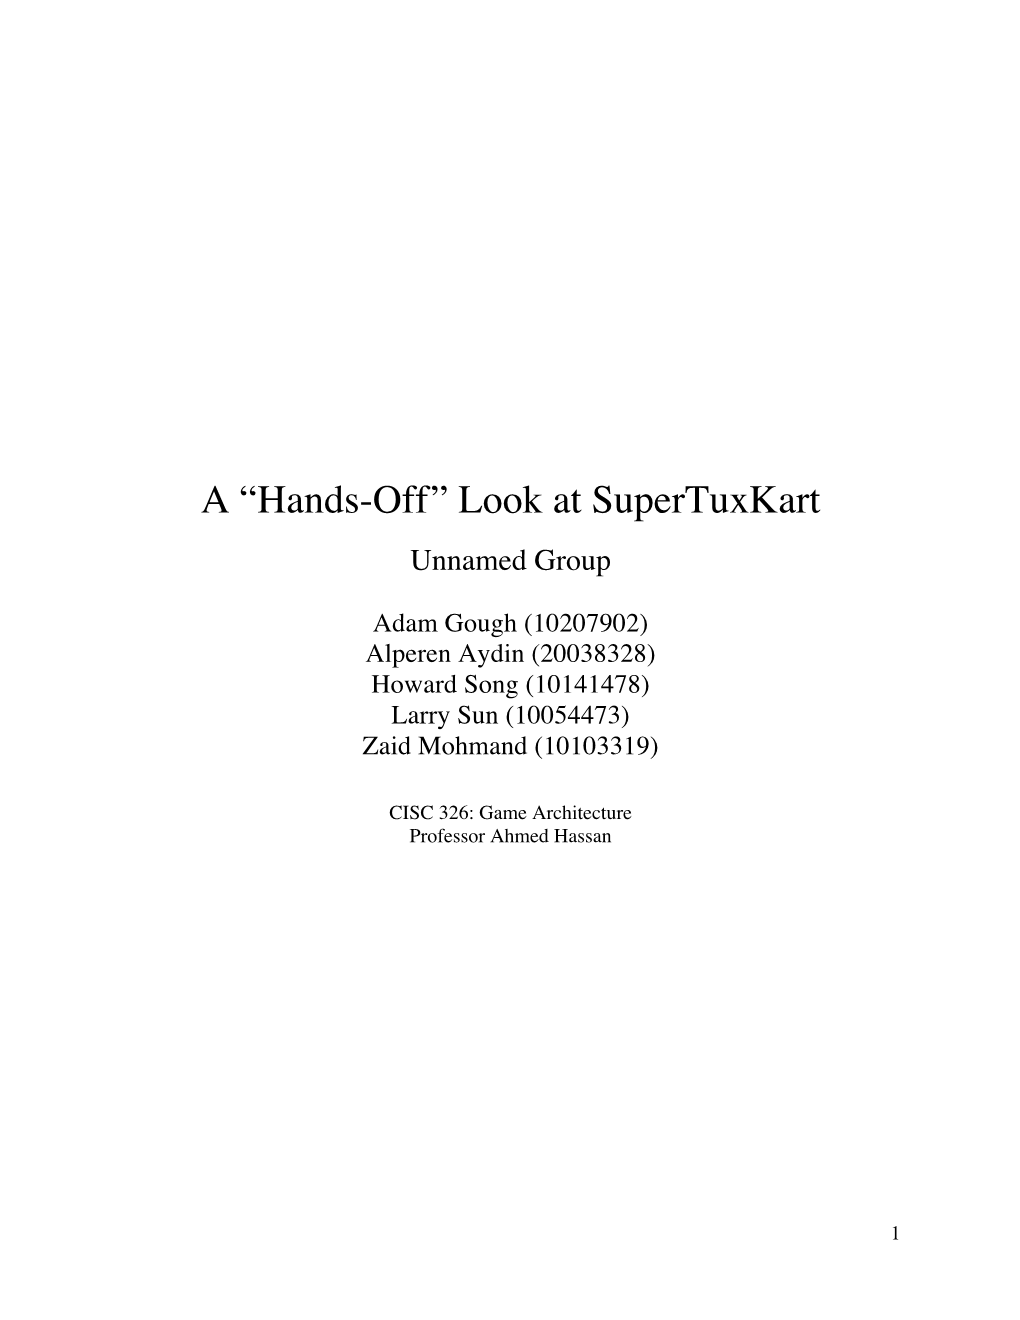 A “Hands-Off” Look at Supertuxkart